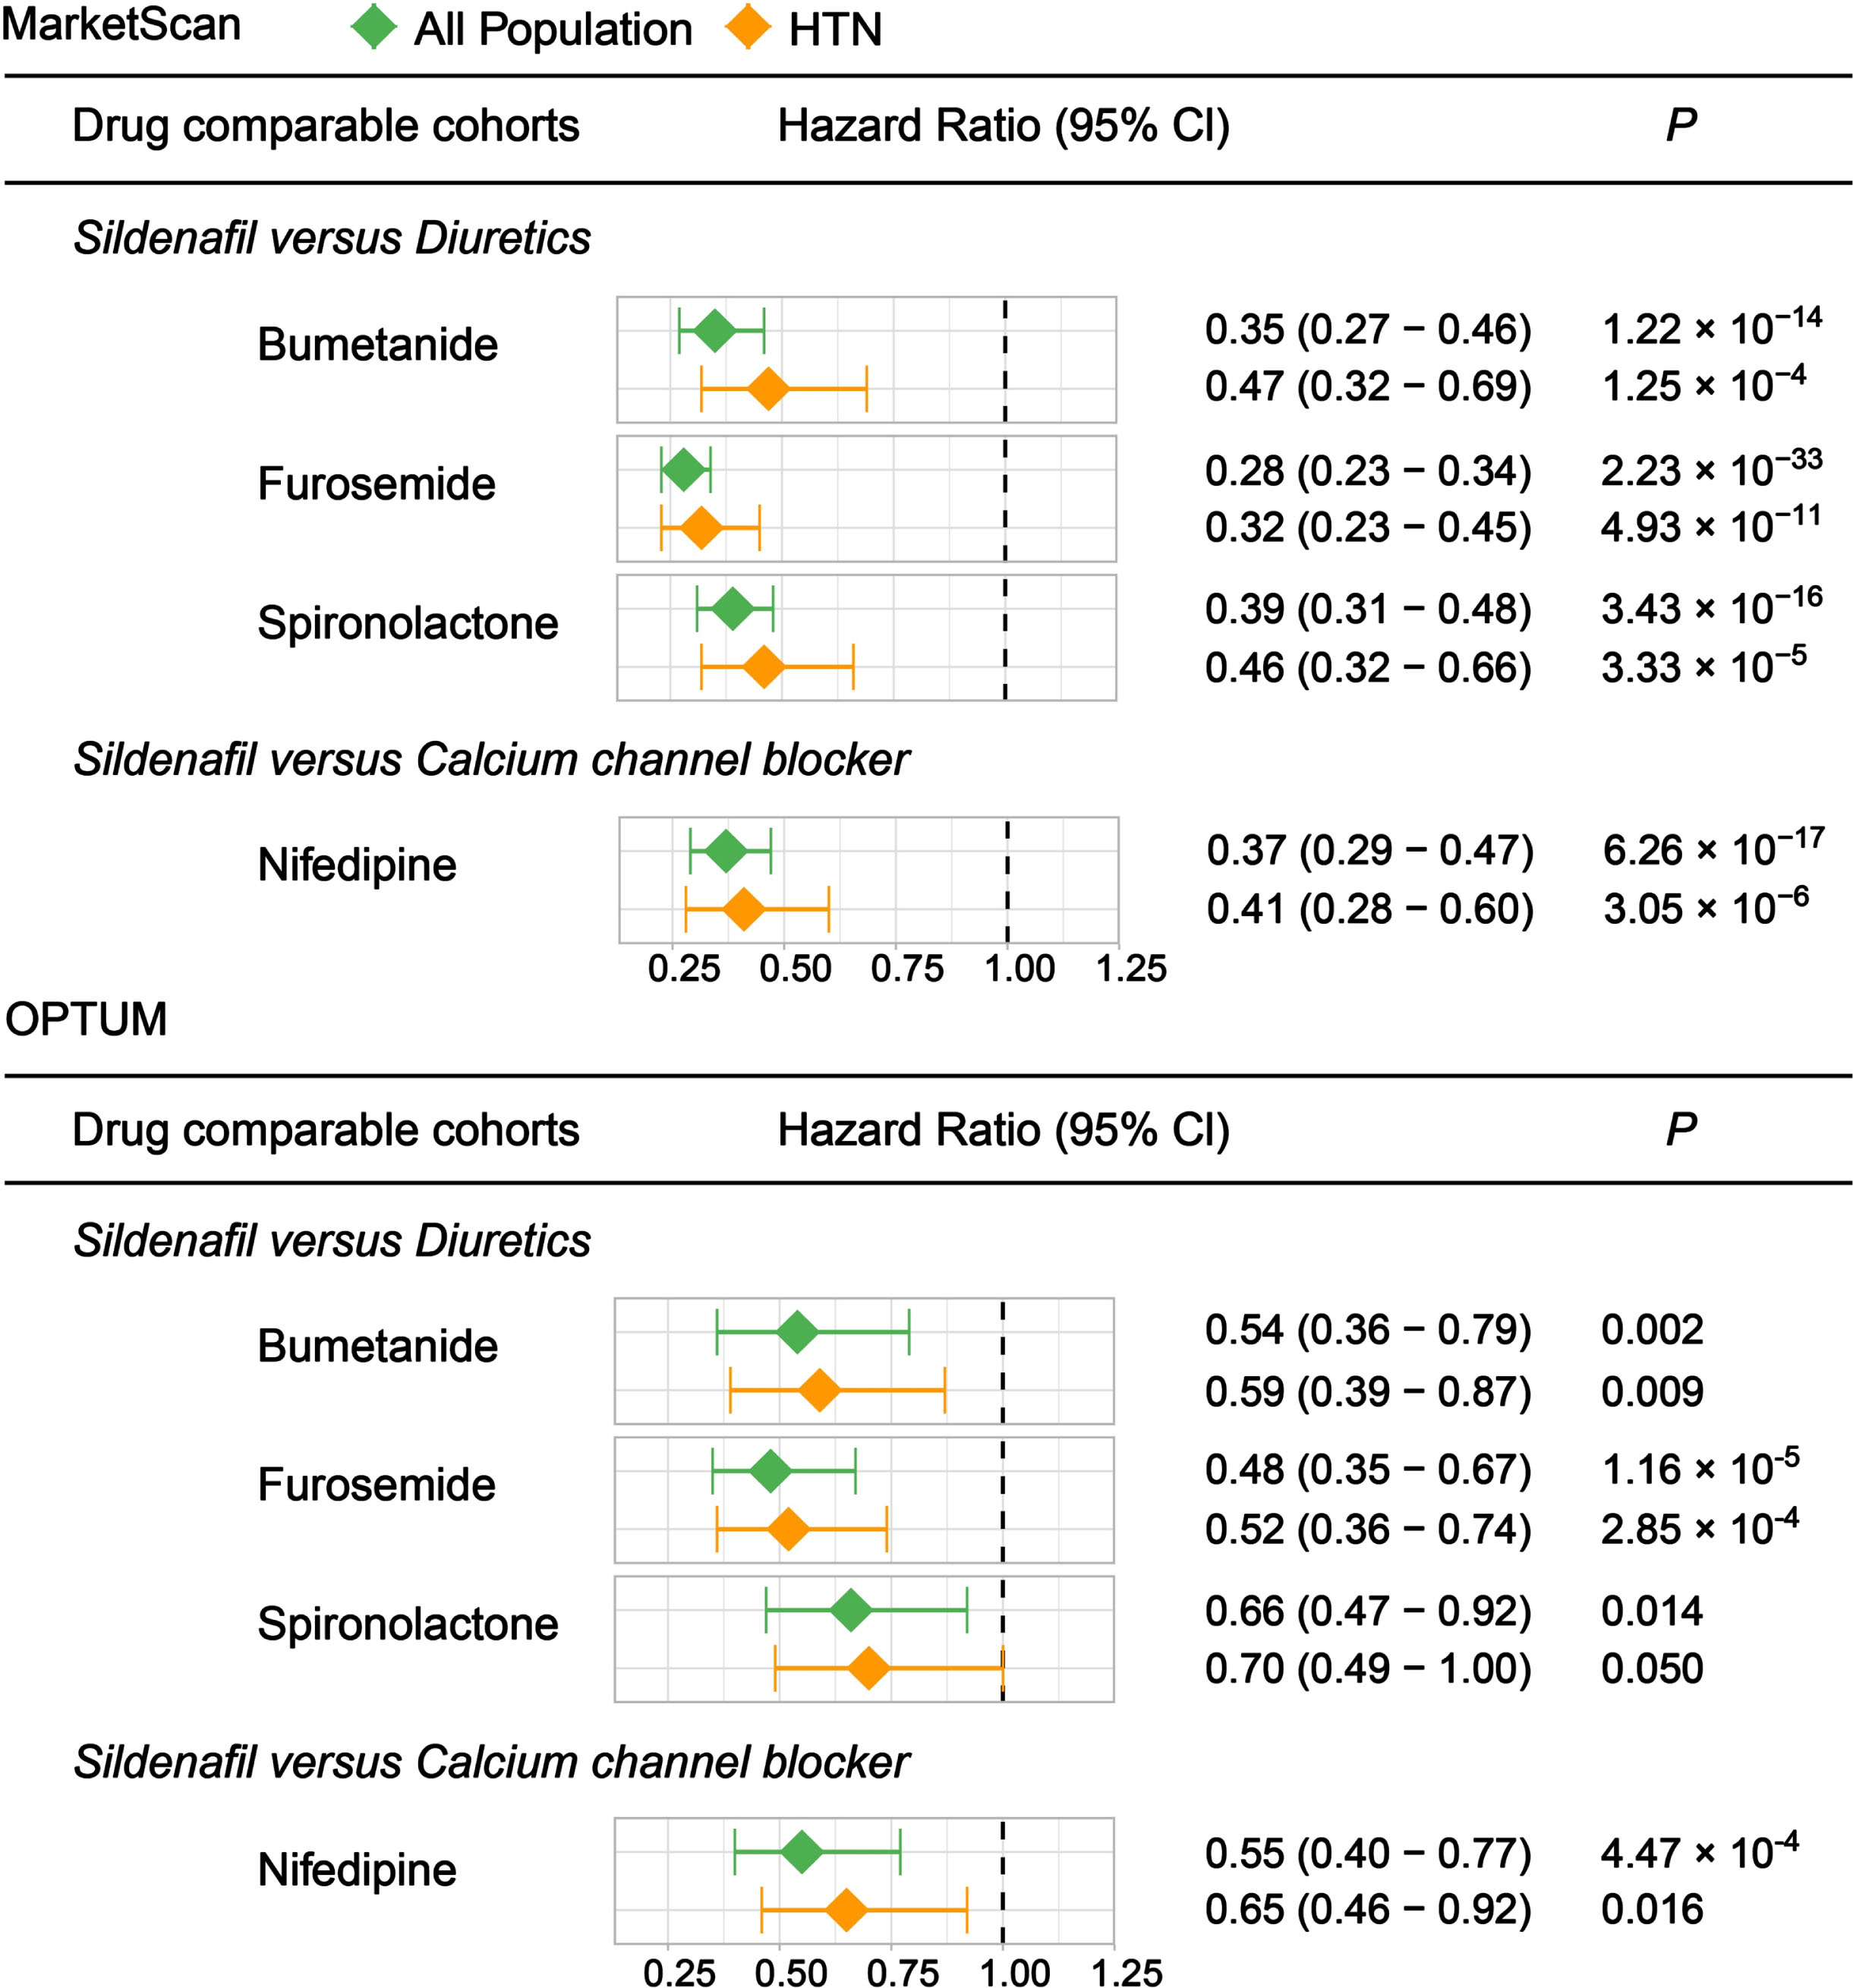 Longitudinal analyses reveal that sildenafil usage is associated with reduced incidence of AD in two independent patient databases. We used real-world patient data from the MarketScan® Medicare Supplemental Database and Clinformatics® (OPTUM) database (see Methods). Four drug cohorts in both all population and individuals with hypertension (HTN) were conducted respectively: sildenafil vs. a calcium channel blocker (nifedipine) and sildenafil vs. three diuretics (bumetanide, furosemide, and spironolactone) respectively. We chose calcium channel blockers and diuretics as comparator drugs as they have been used to treat pulmonary hypertension (PH) on the European Society of Cardiology and the European Respiratory Society Guidelines for treatment of PH.